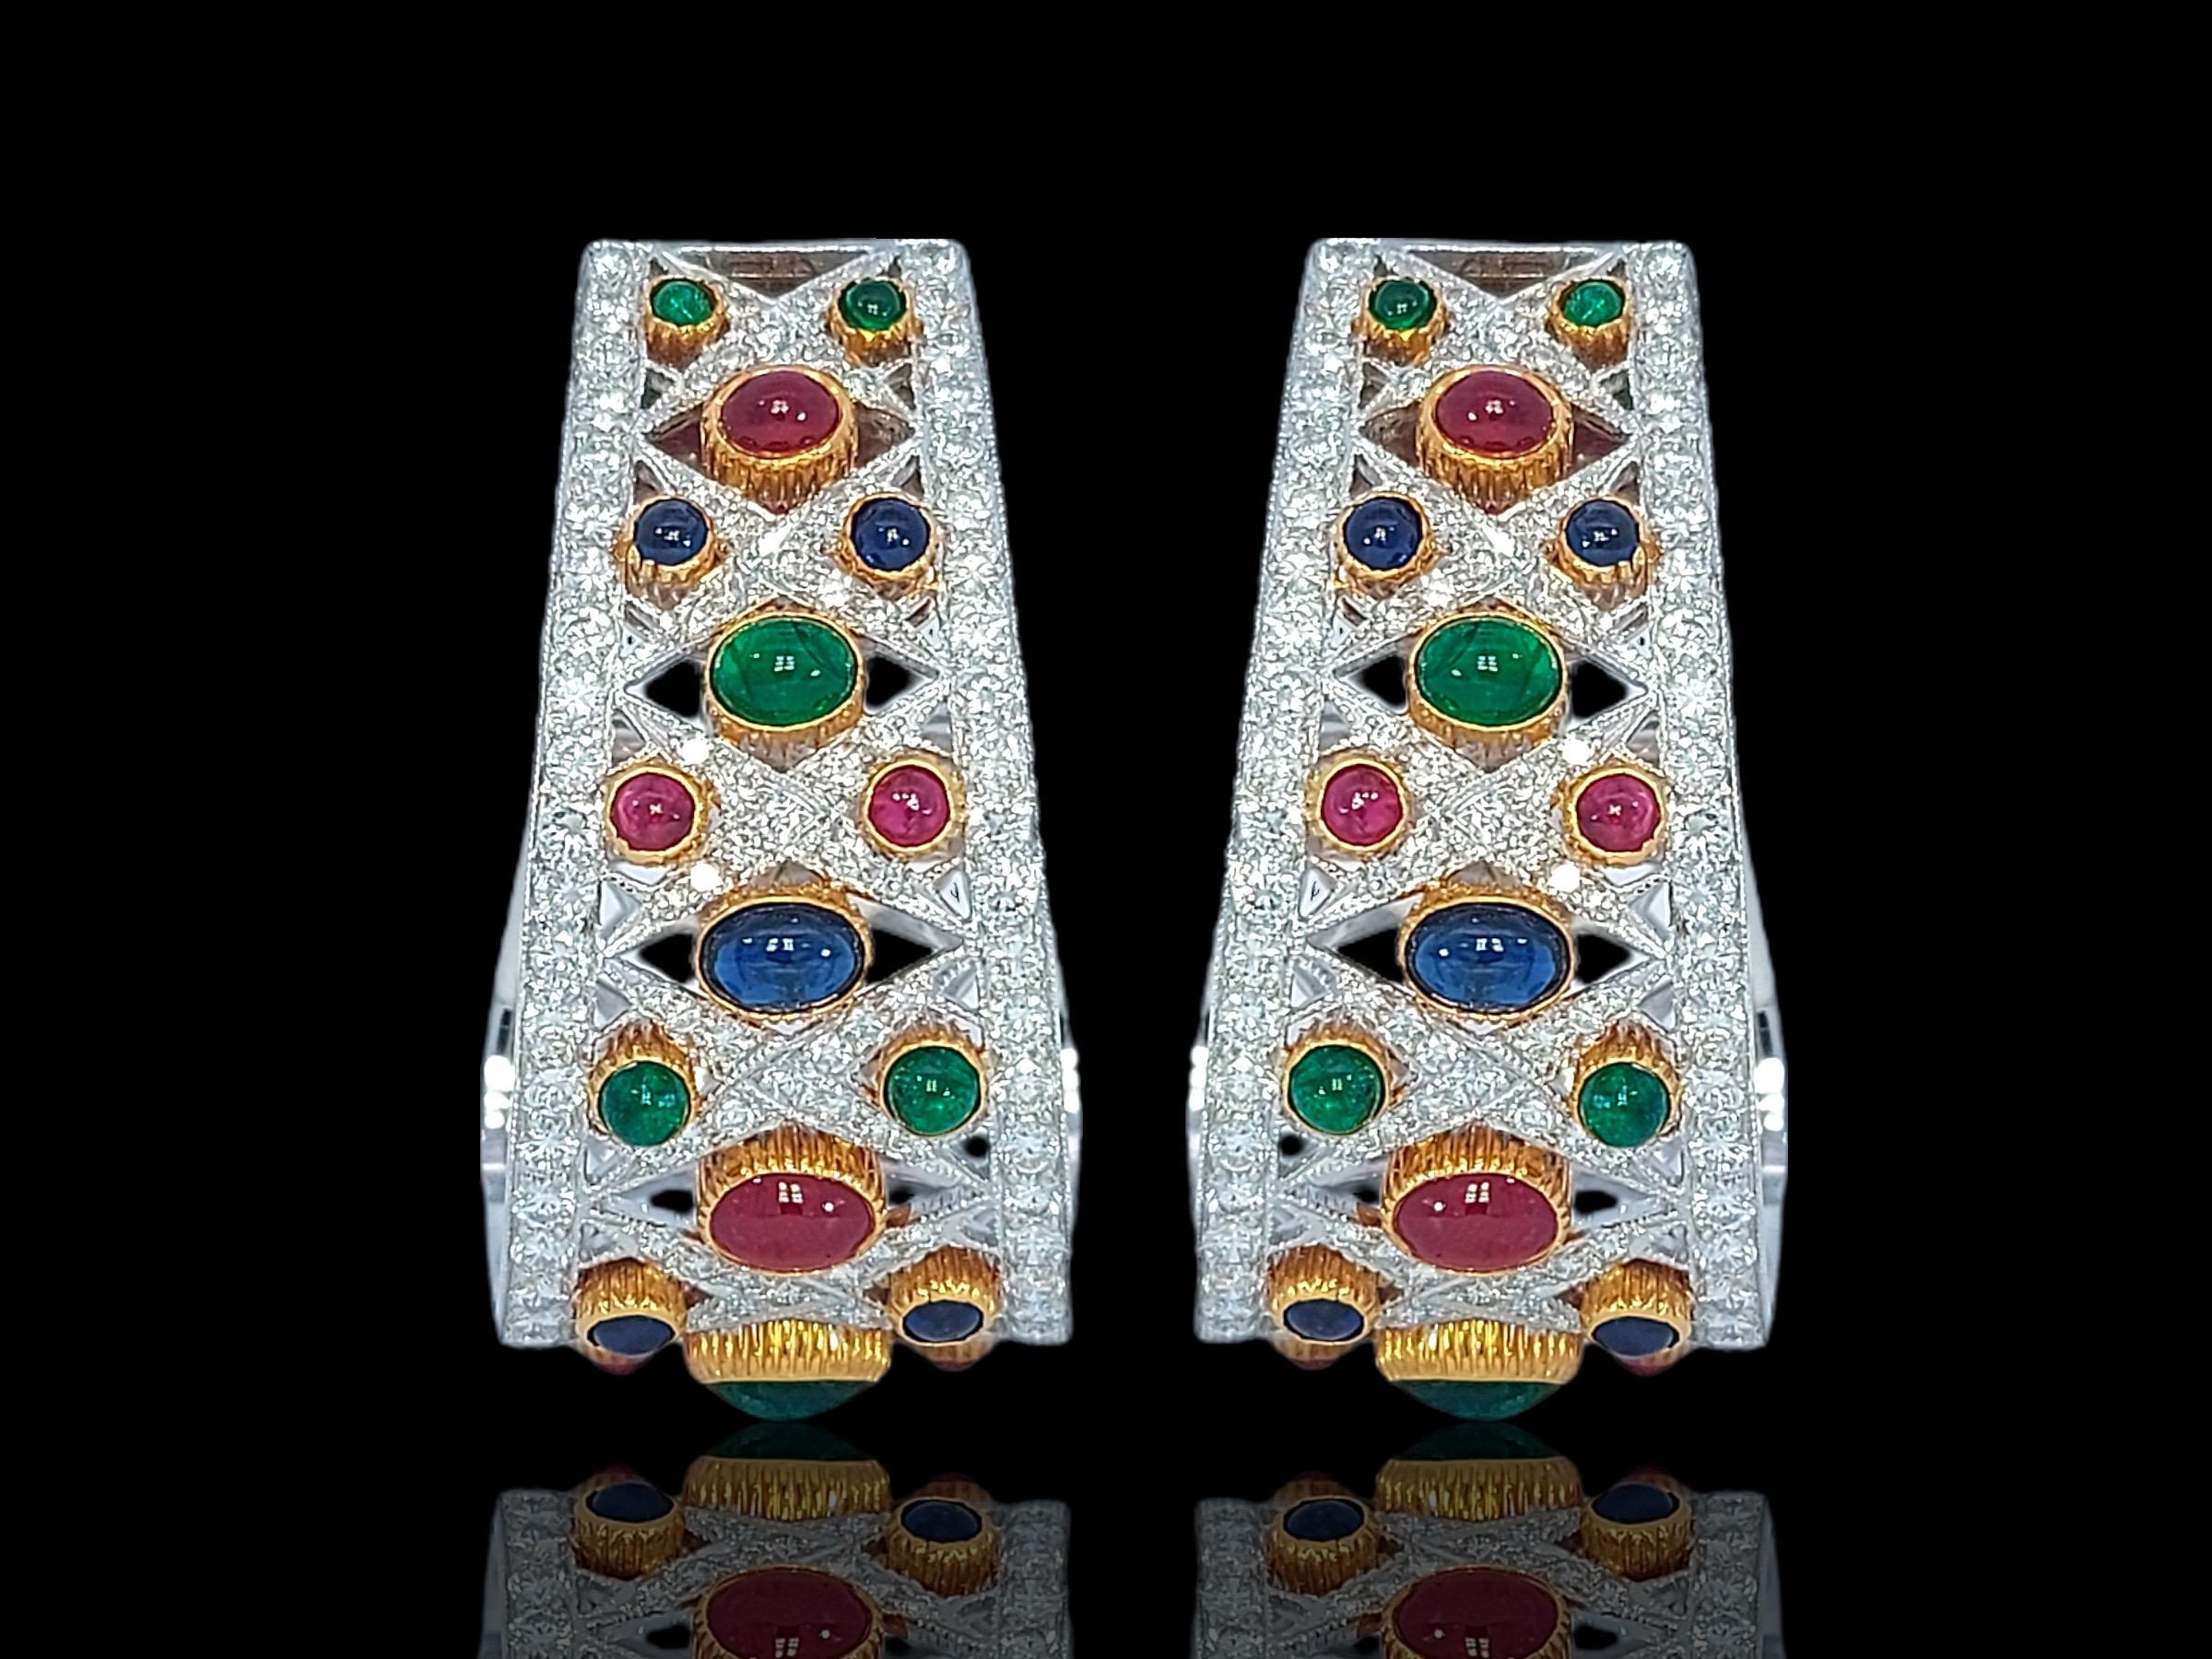 Adler Genève Earrings Set with Precious Stones & Diamonds from Estate His Majesty Sultan Qaboos Bin Said Oman

Qaboos bin Said Al Said was Sultan of Oman from 23 July 1970 until his death in 2020

Ruby: 12 cabochon red sapphires 

Emerald: 12